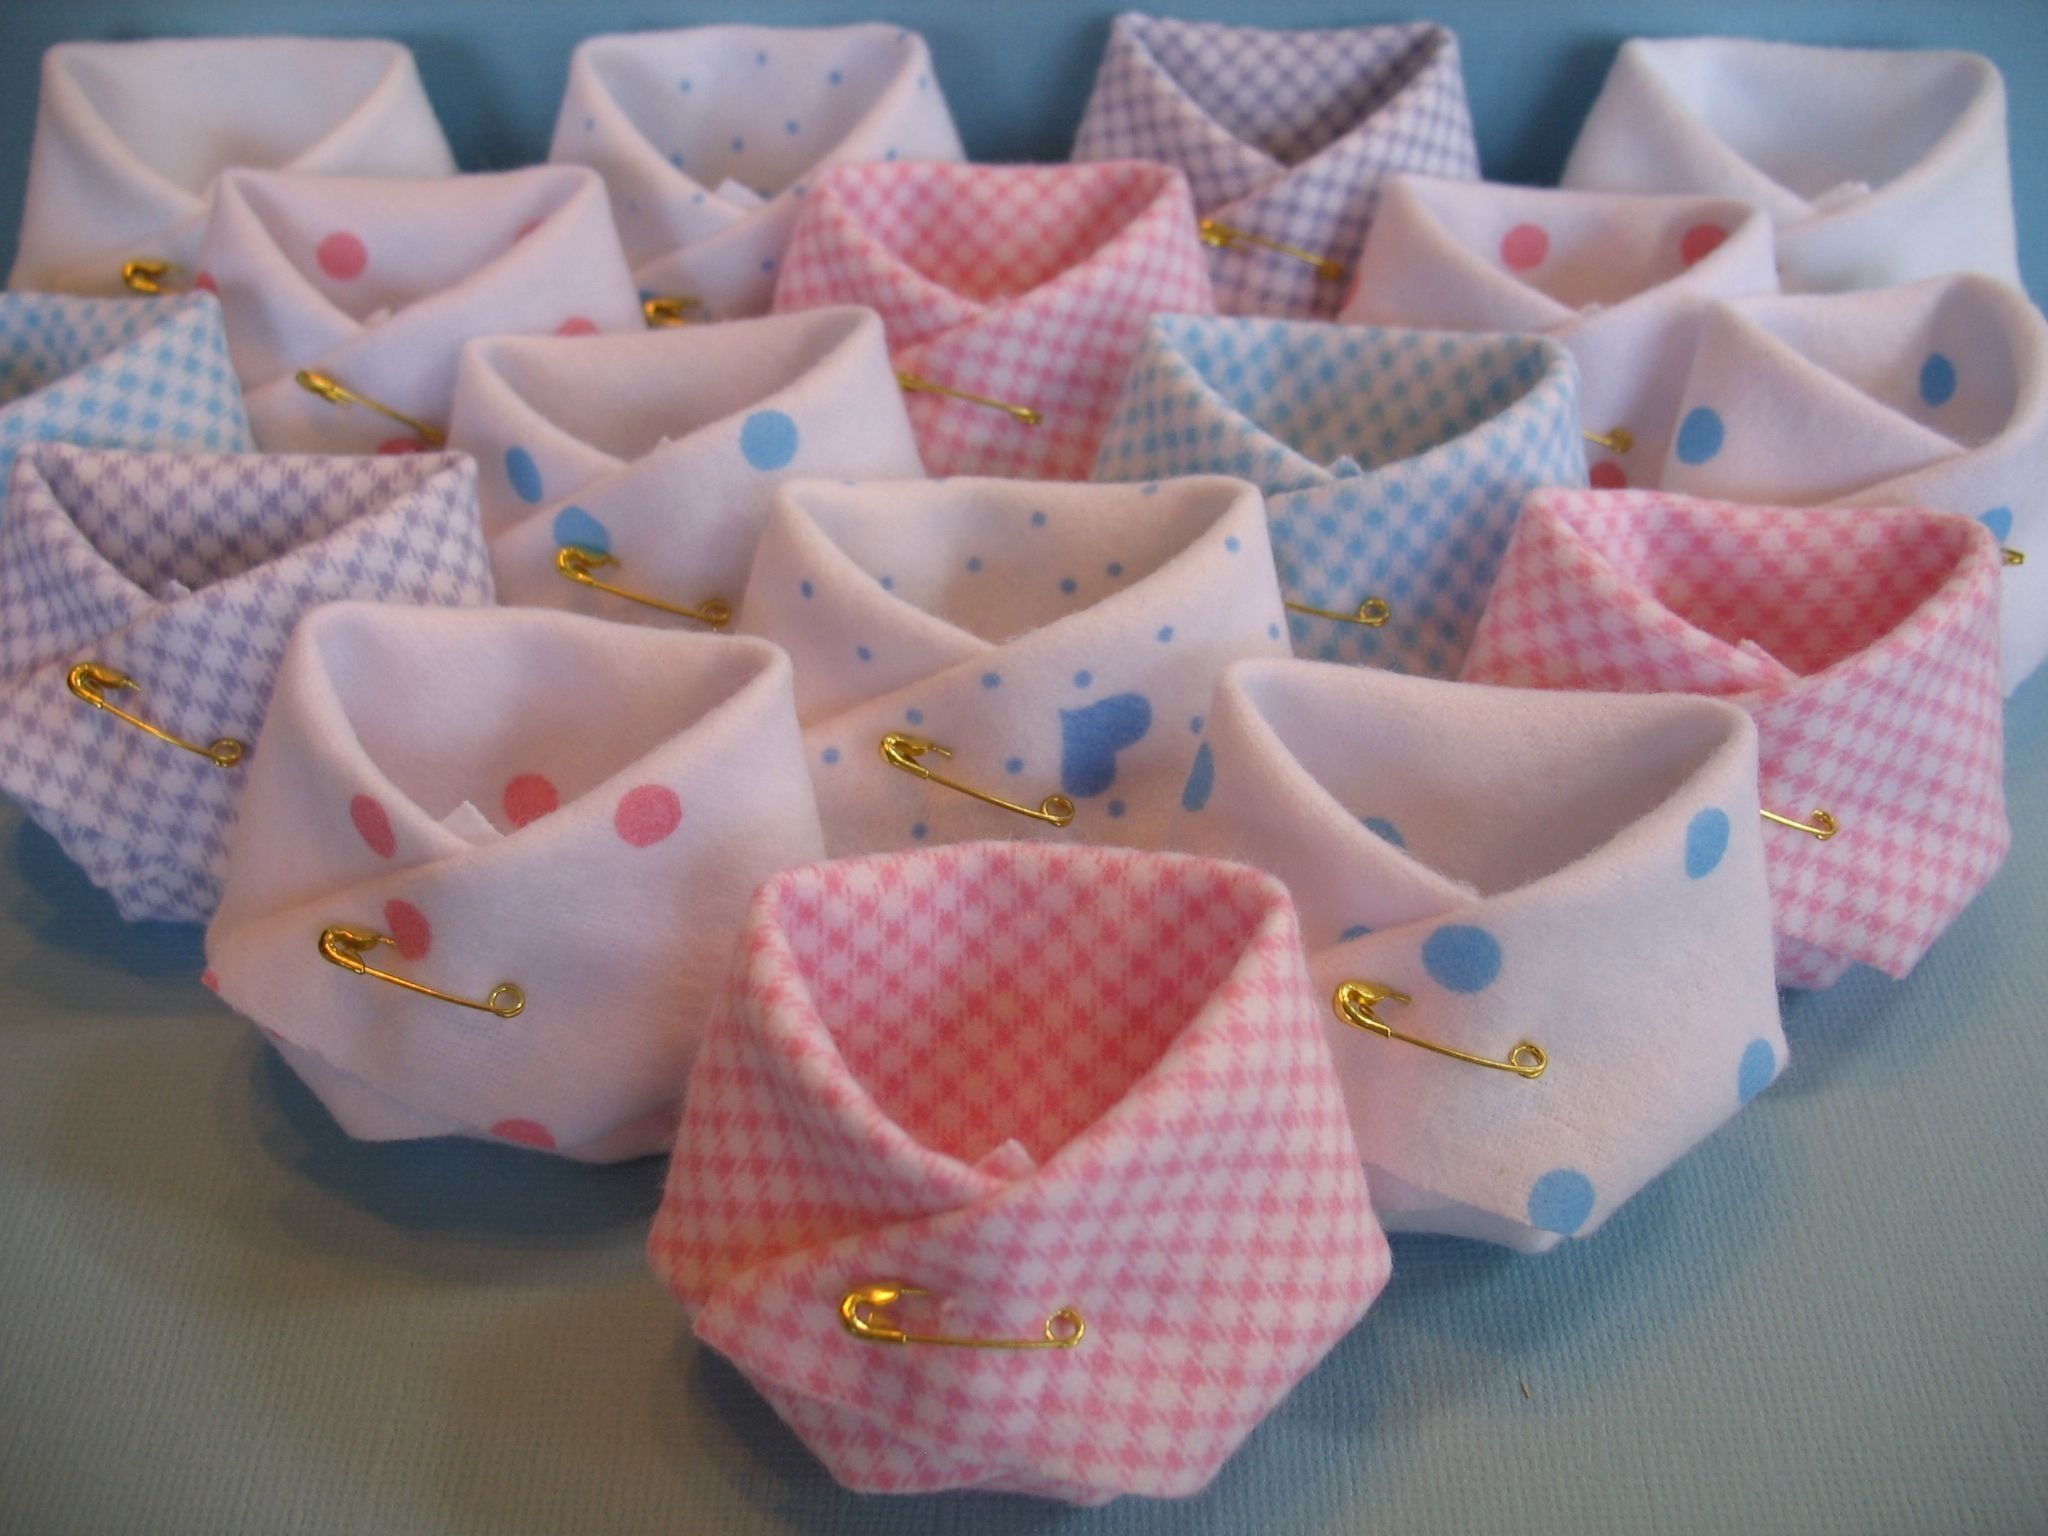 10 Most Recommended Party Favors Ideas For Baby Shower party favors baby shower diapers fill em up about to pop 1 2022